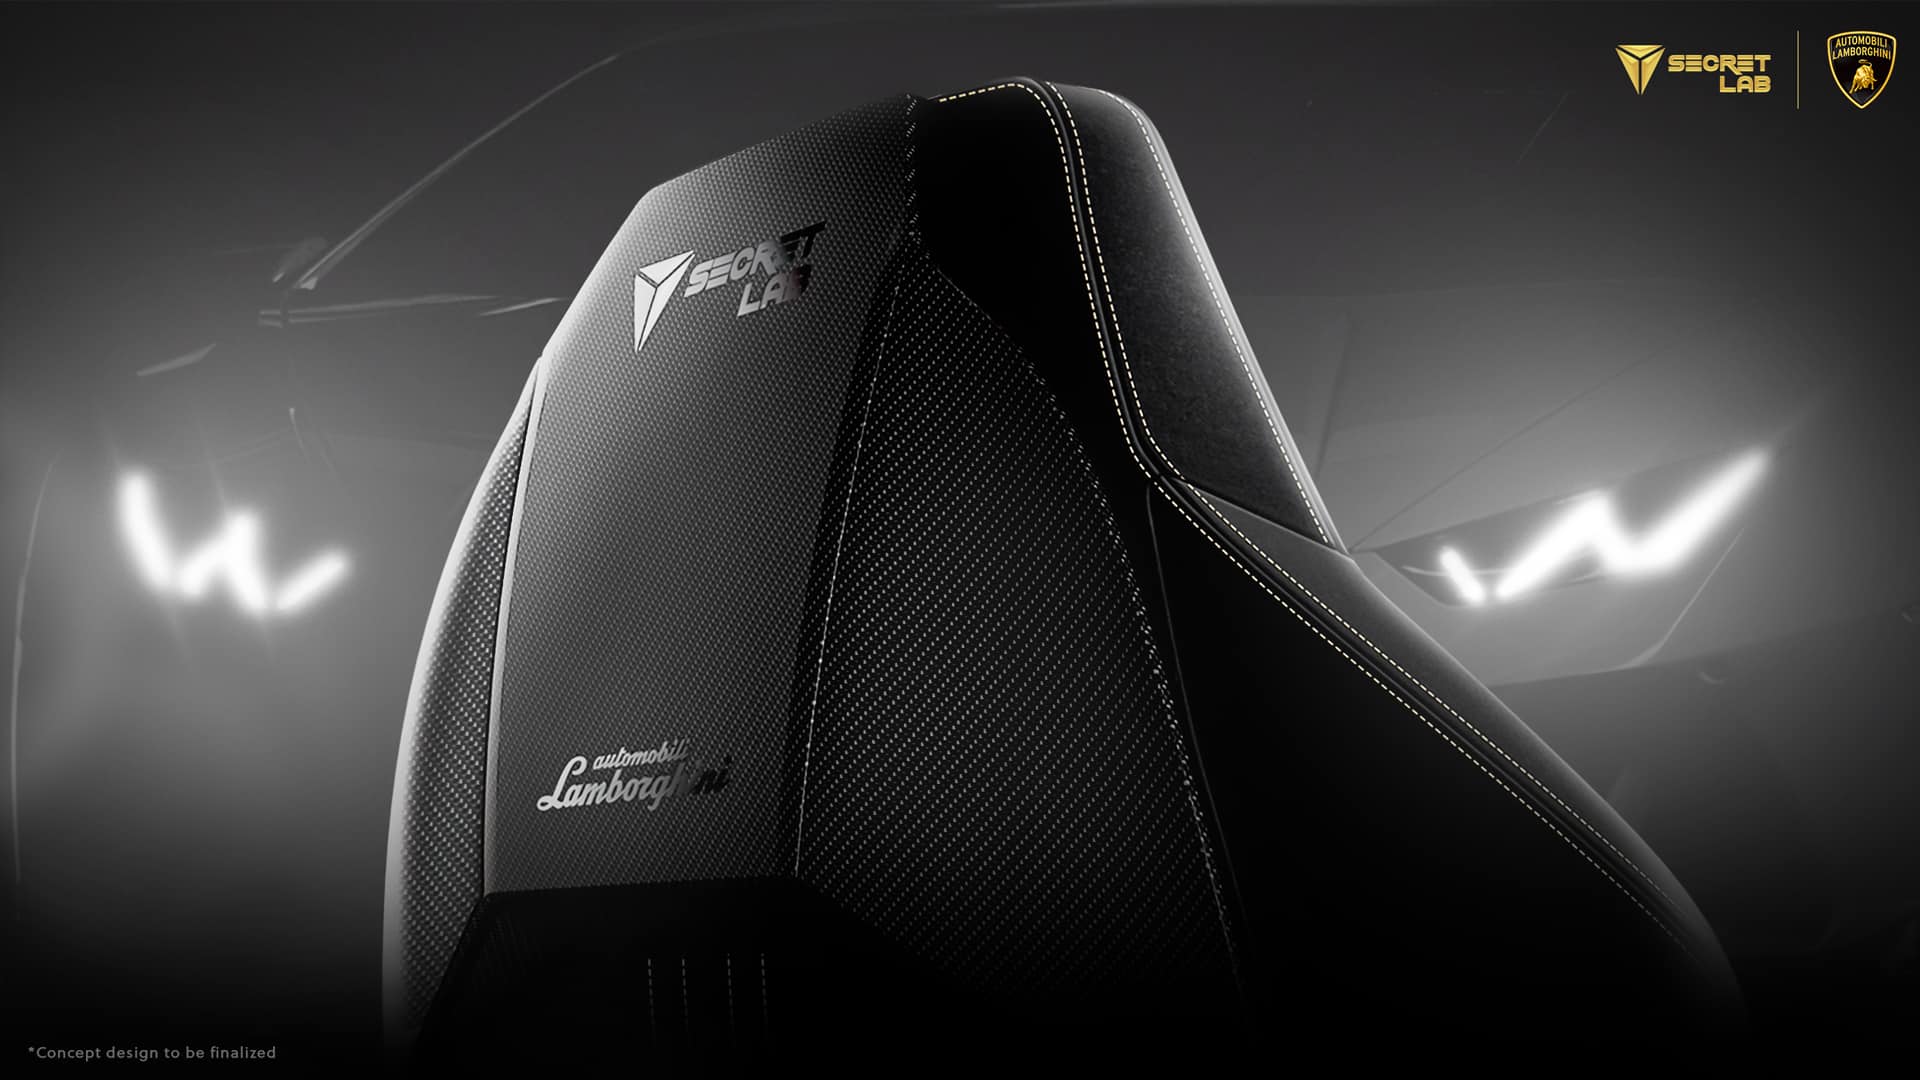 Secretlab has worked with Lamborghini to create the ultimate gaming chair